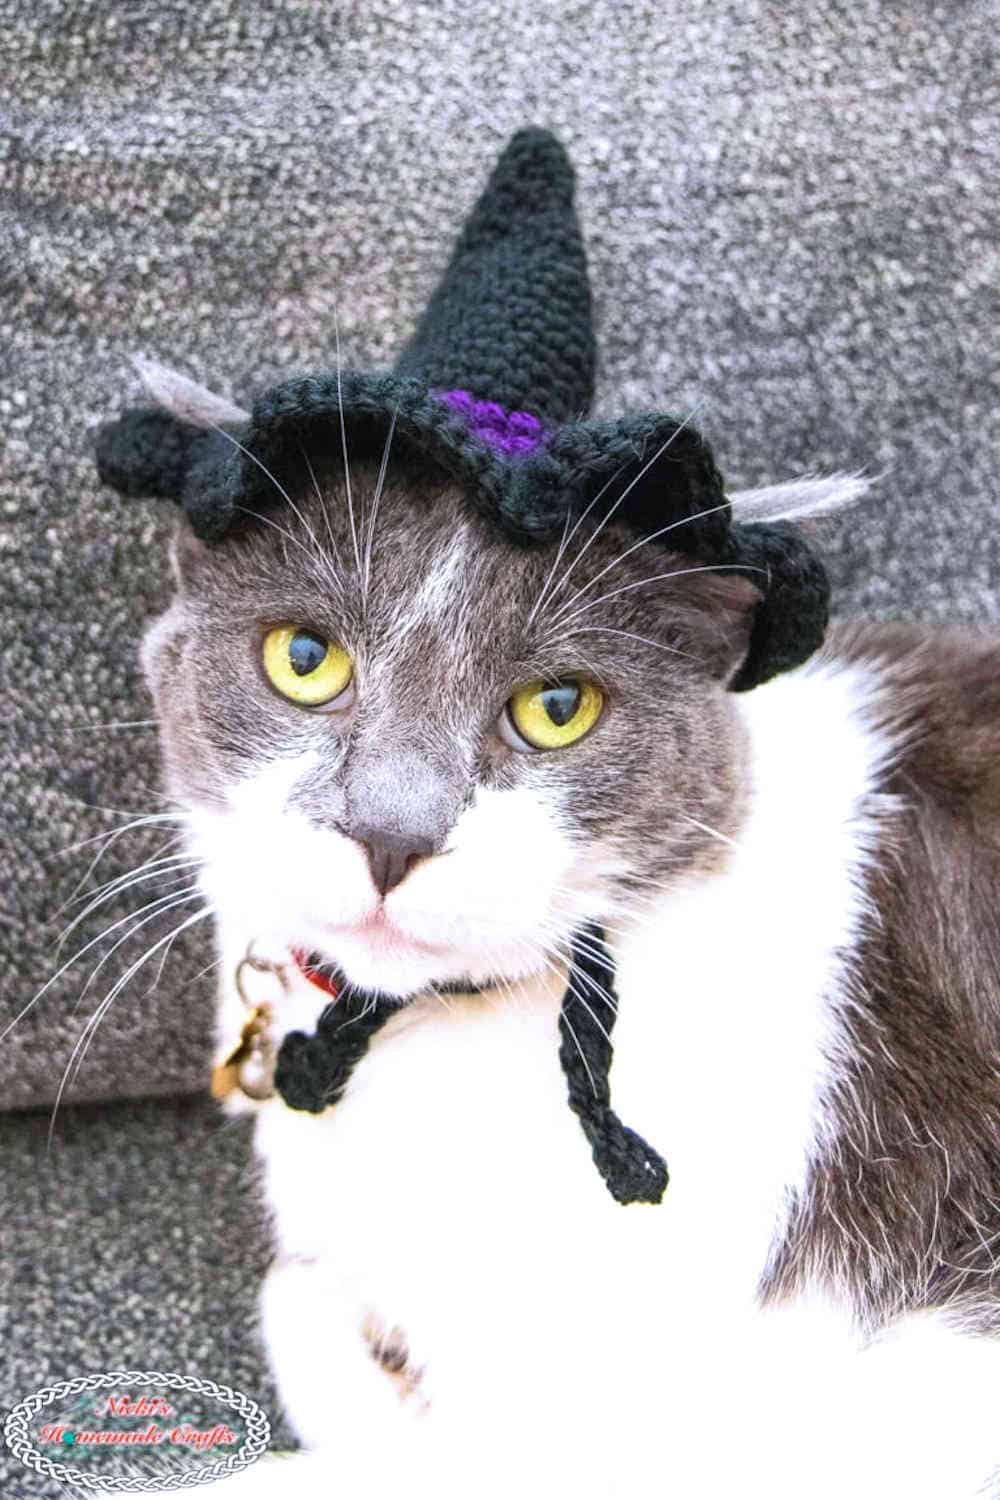 Cat dressed in crocheted witch hat.